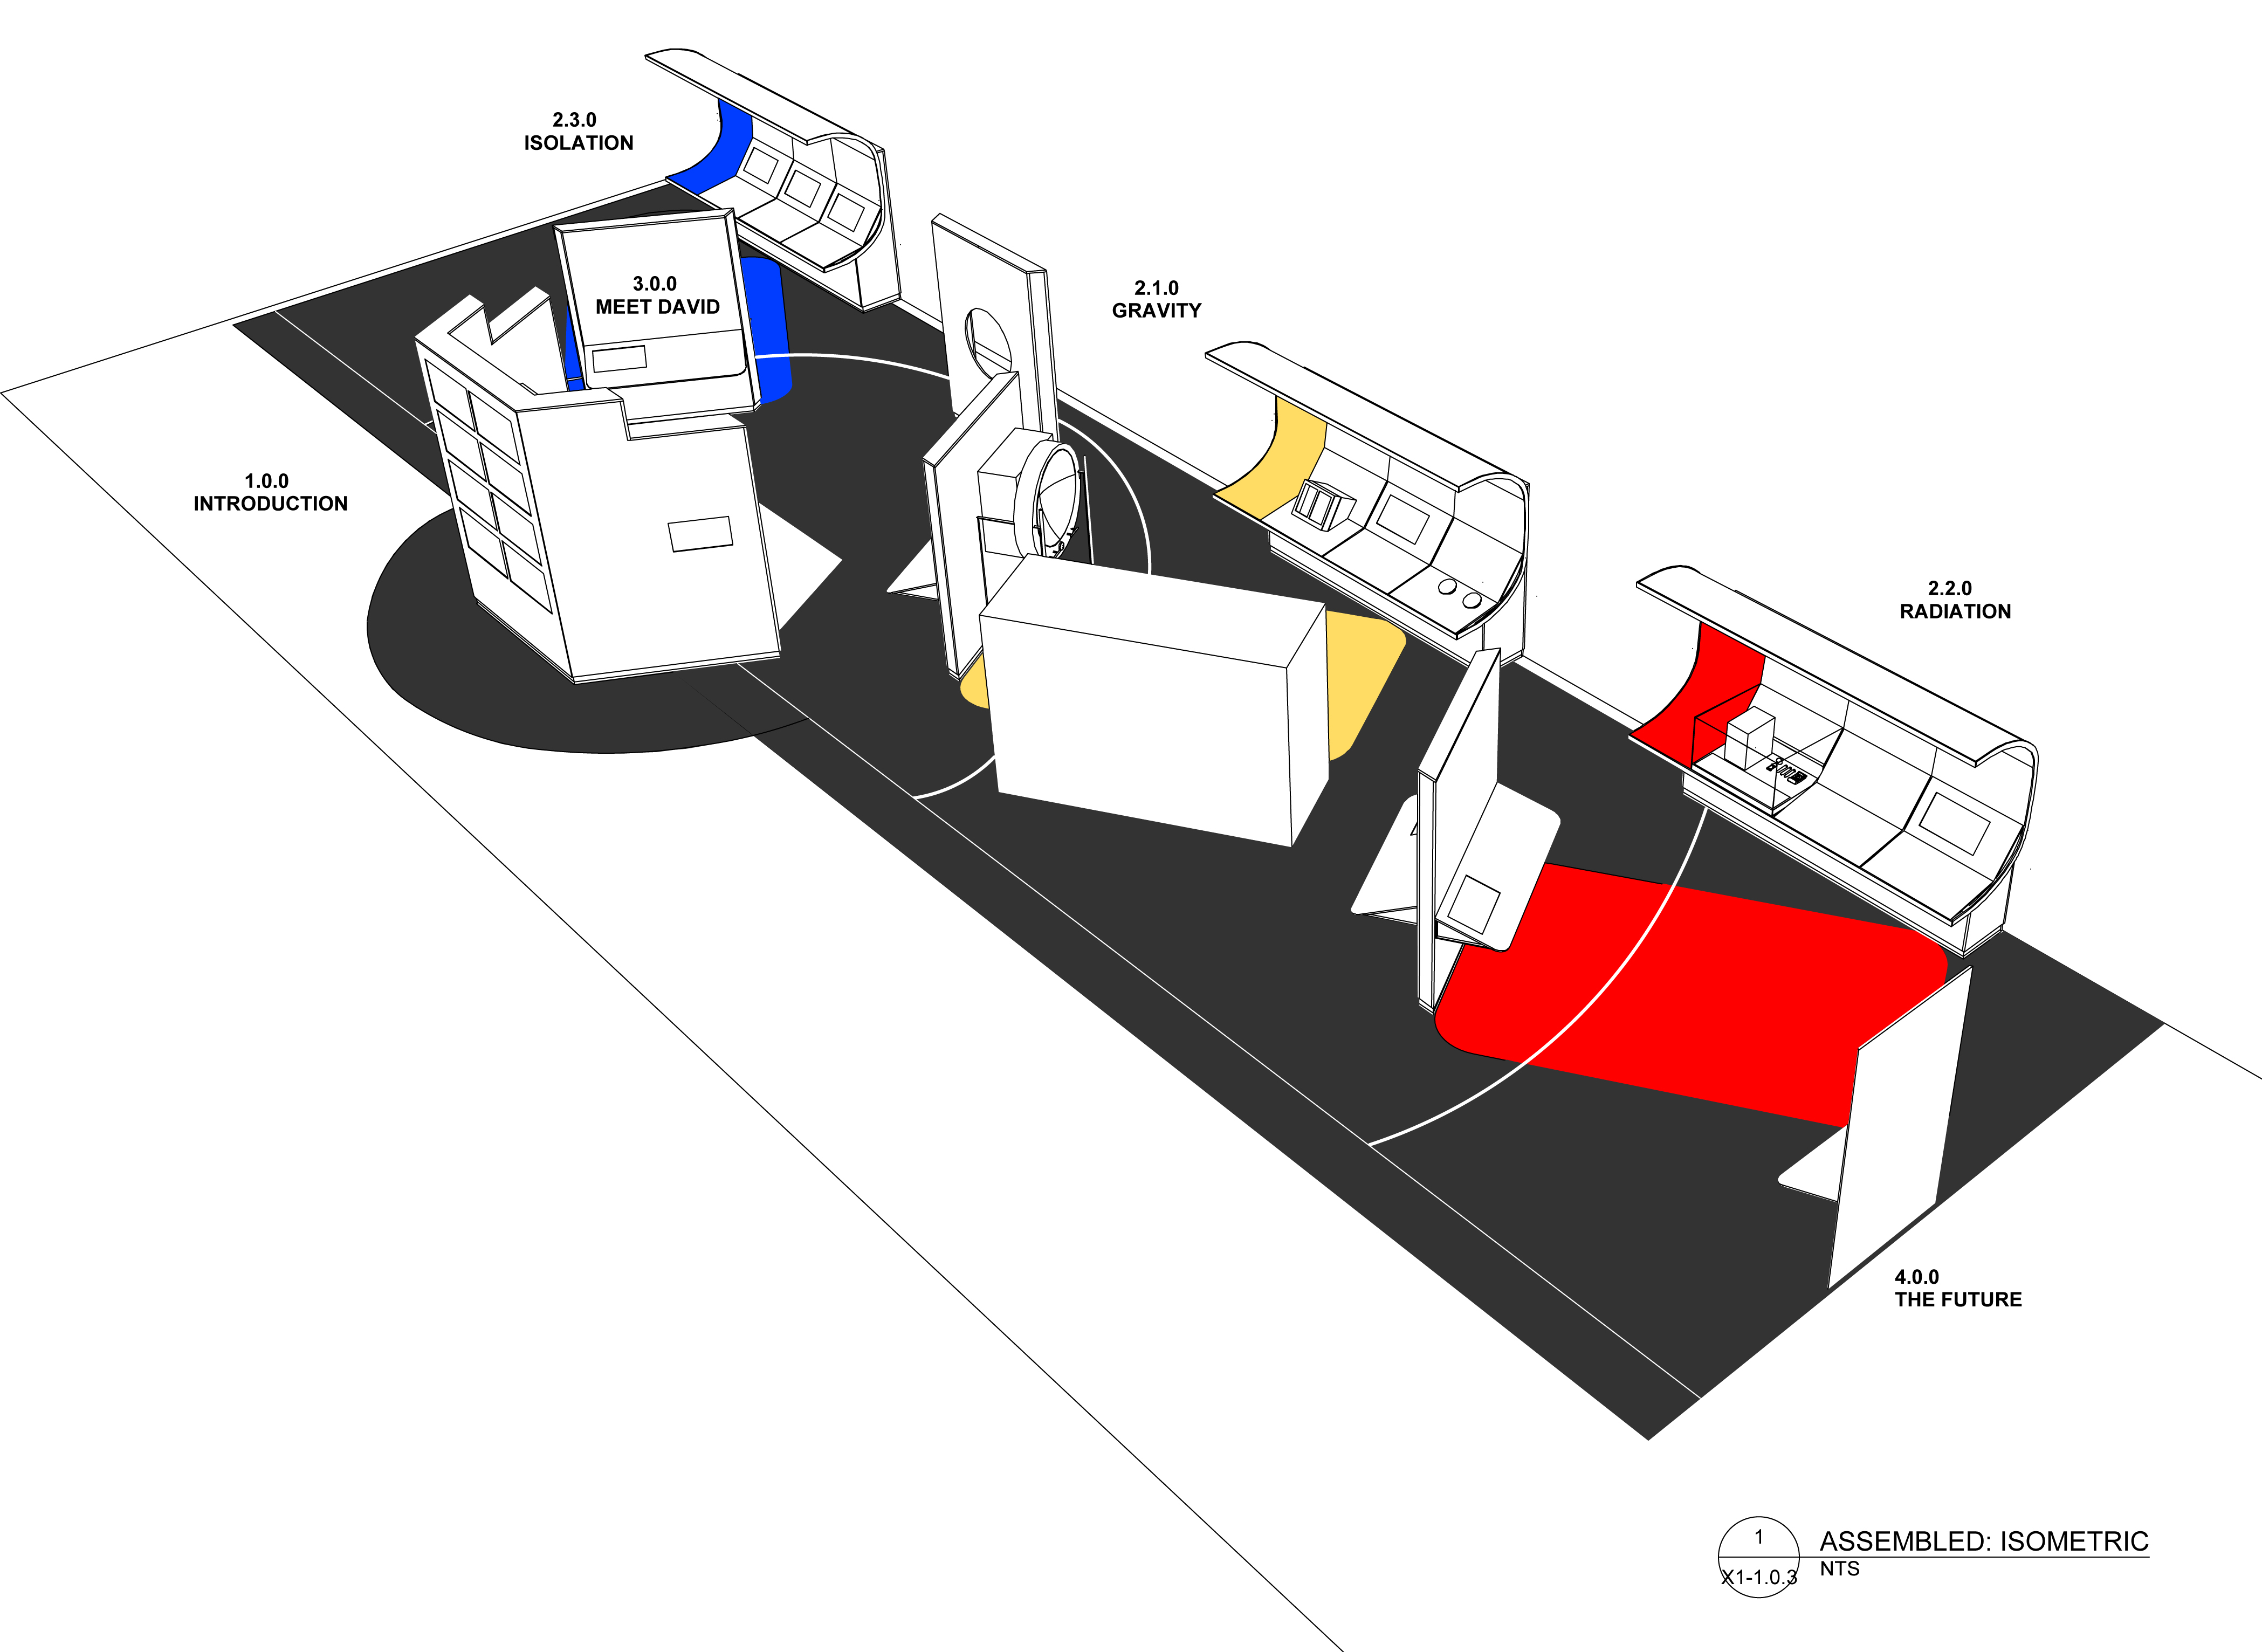 Conceptual plans for the Health in Space exhibition showing its three main sections.